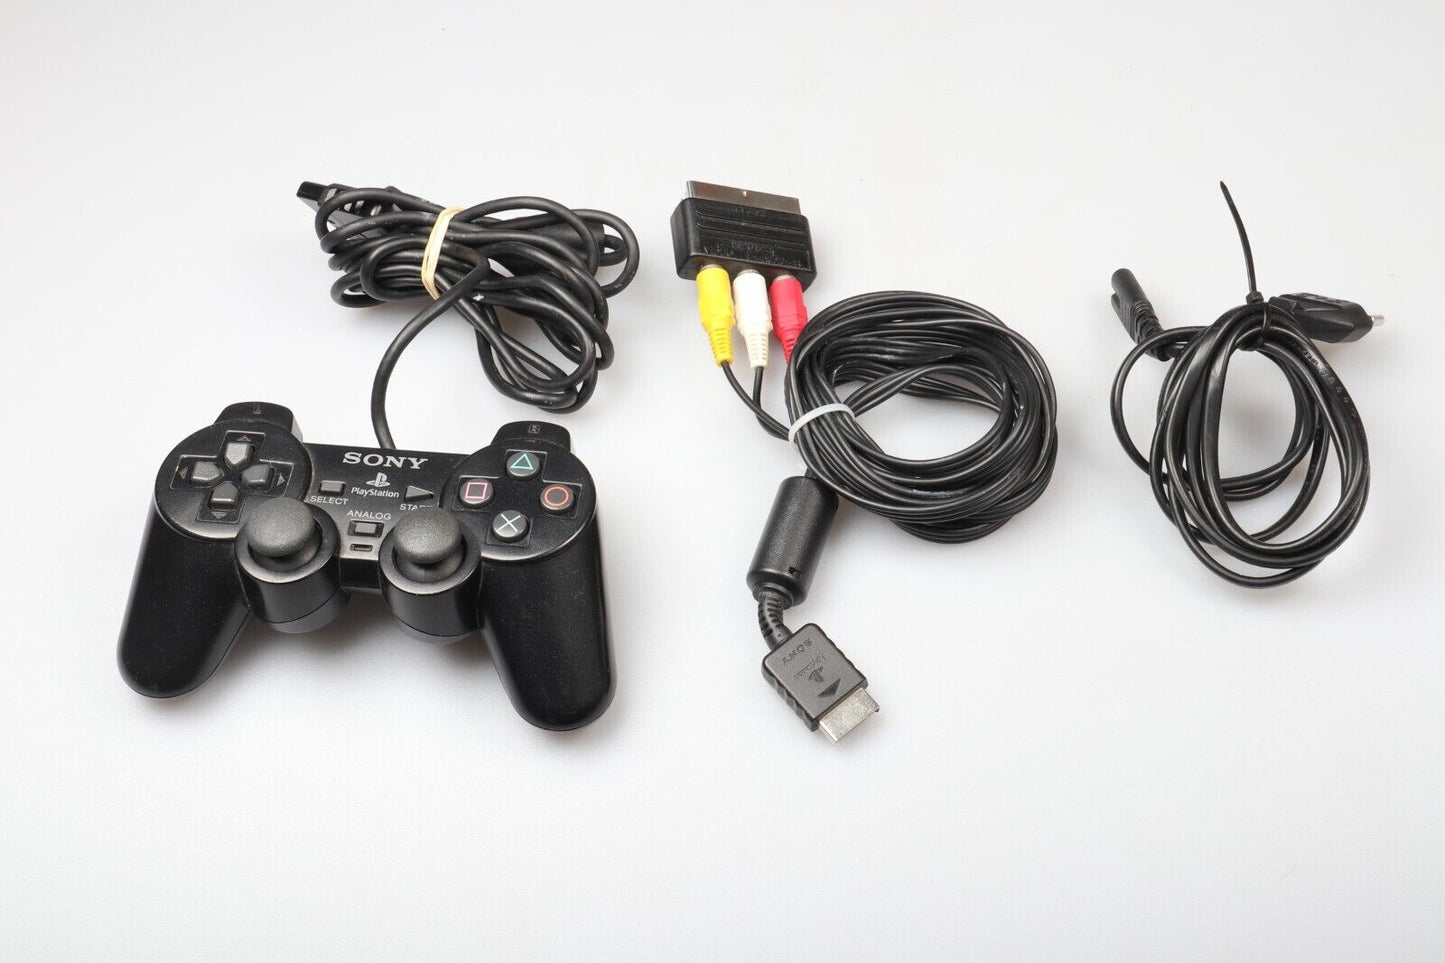 PlayStation 2 | Fat SCPH-30004 | Controller & Cables | Black (DAMAGED UNDERSIDE)